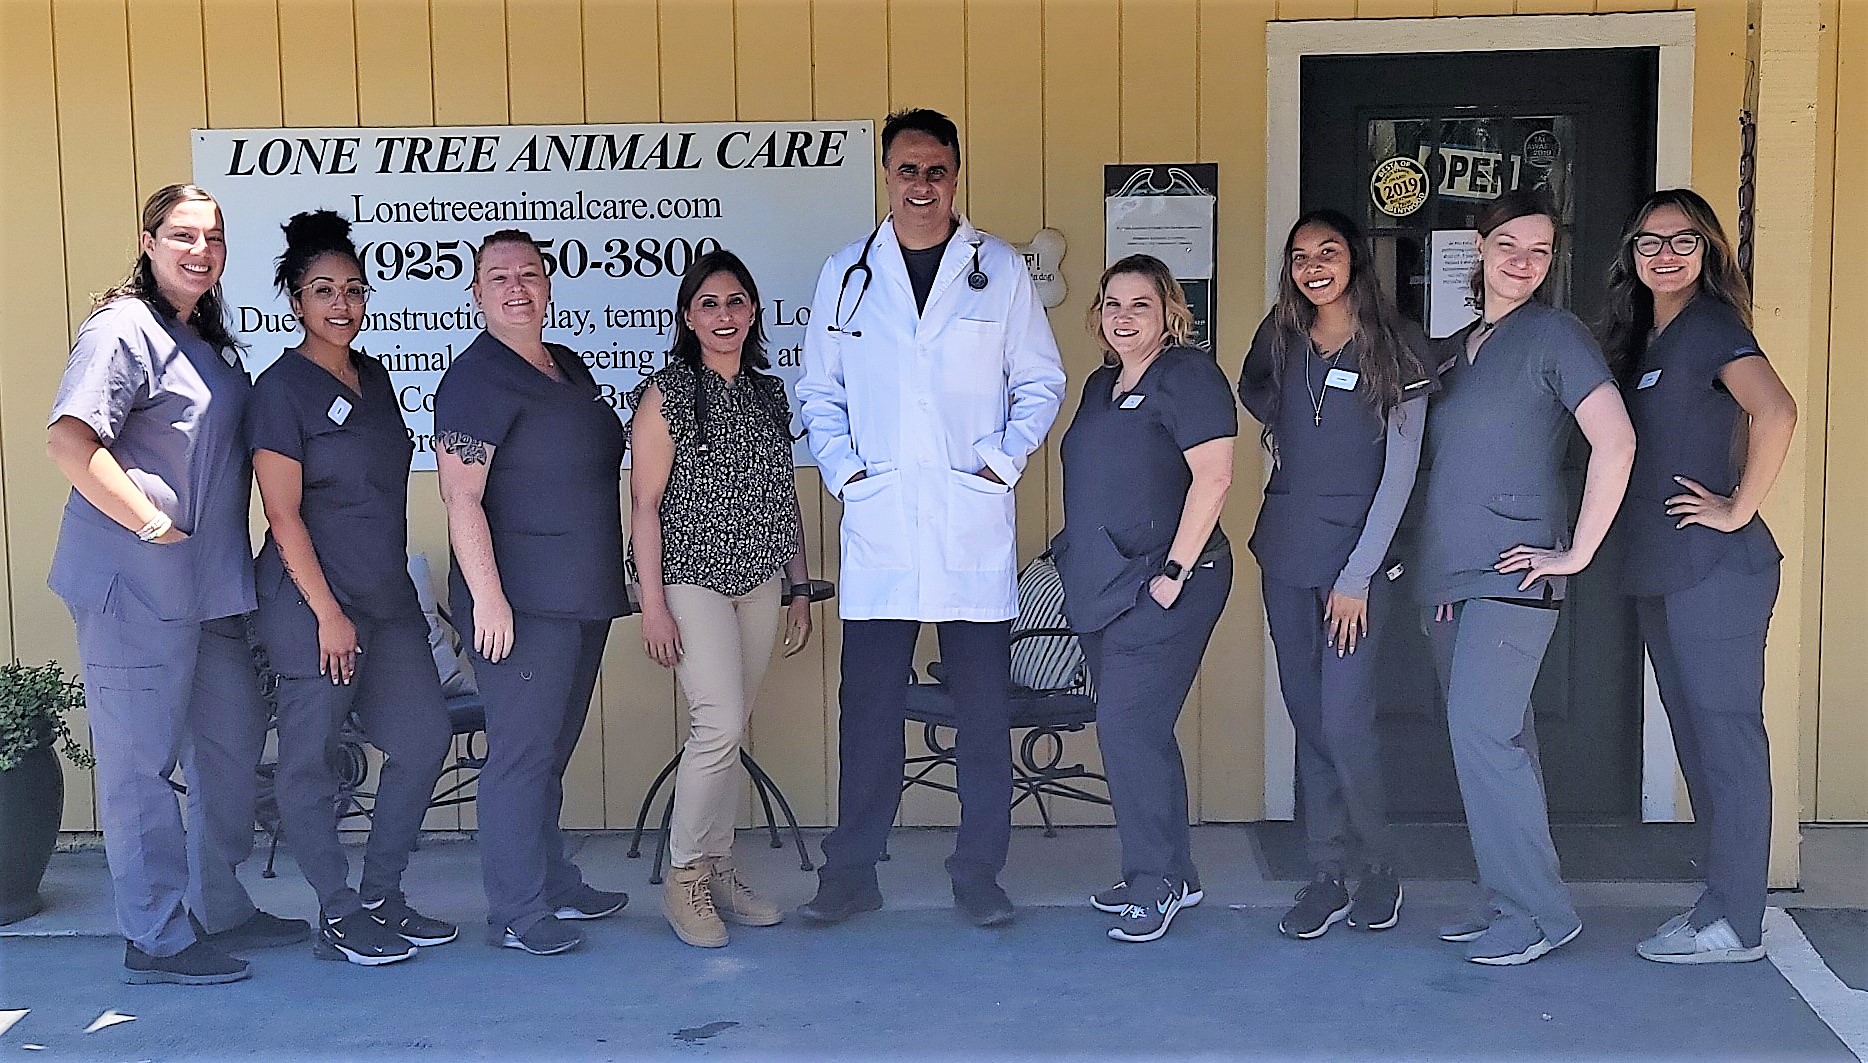 About | Lone Tree Animal Care